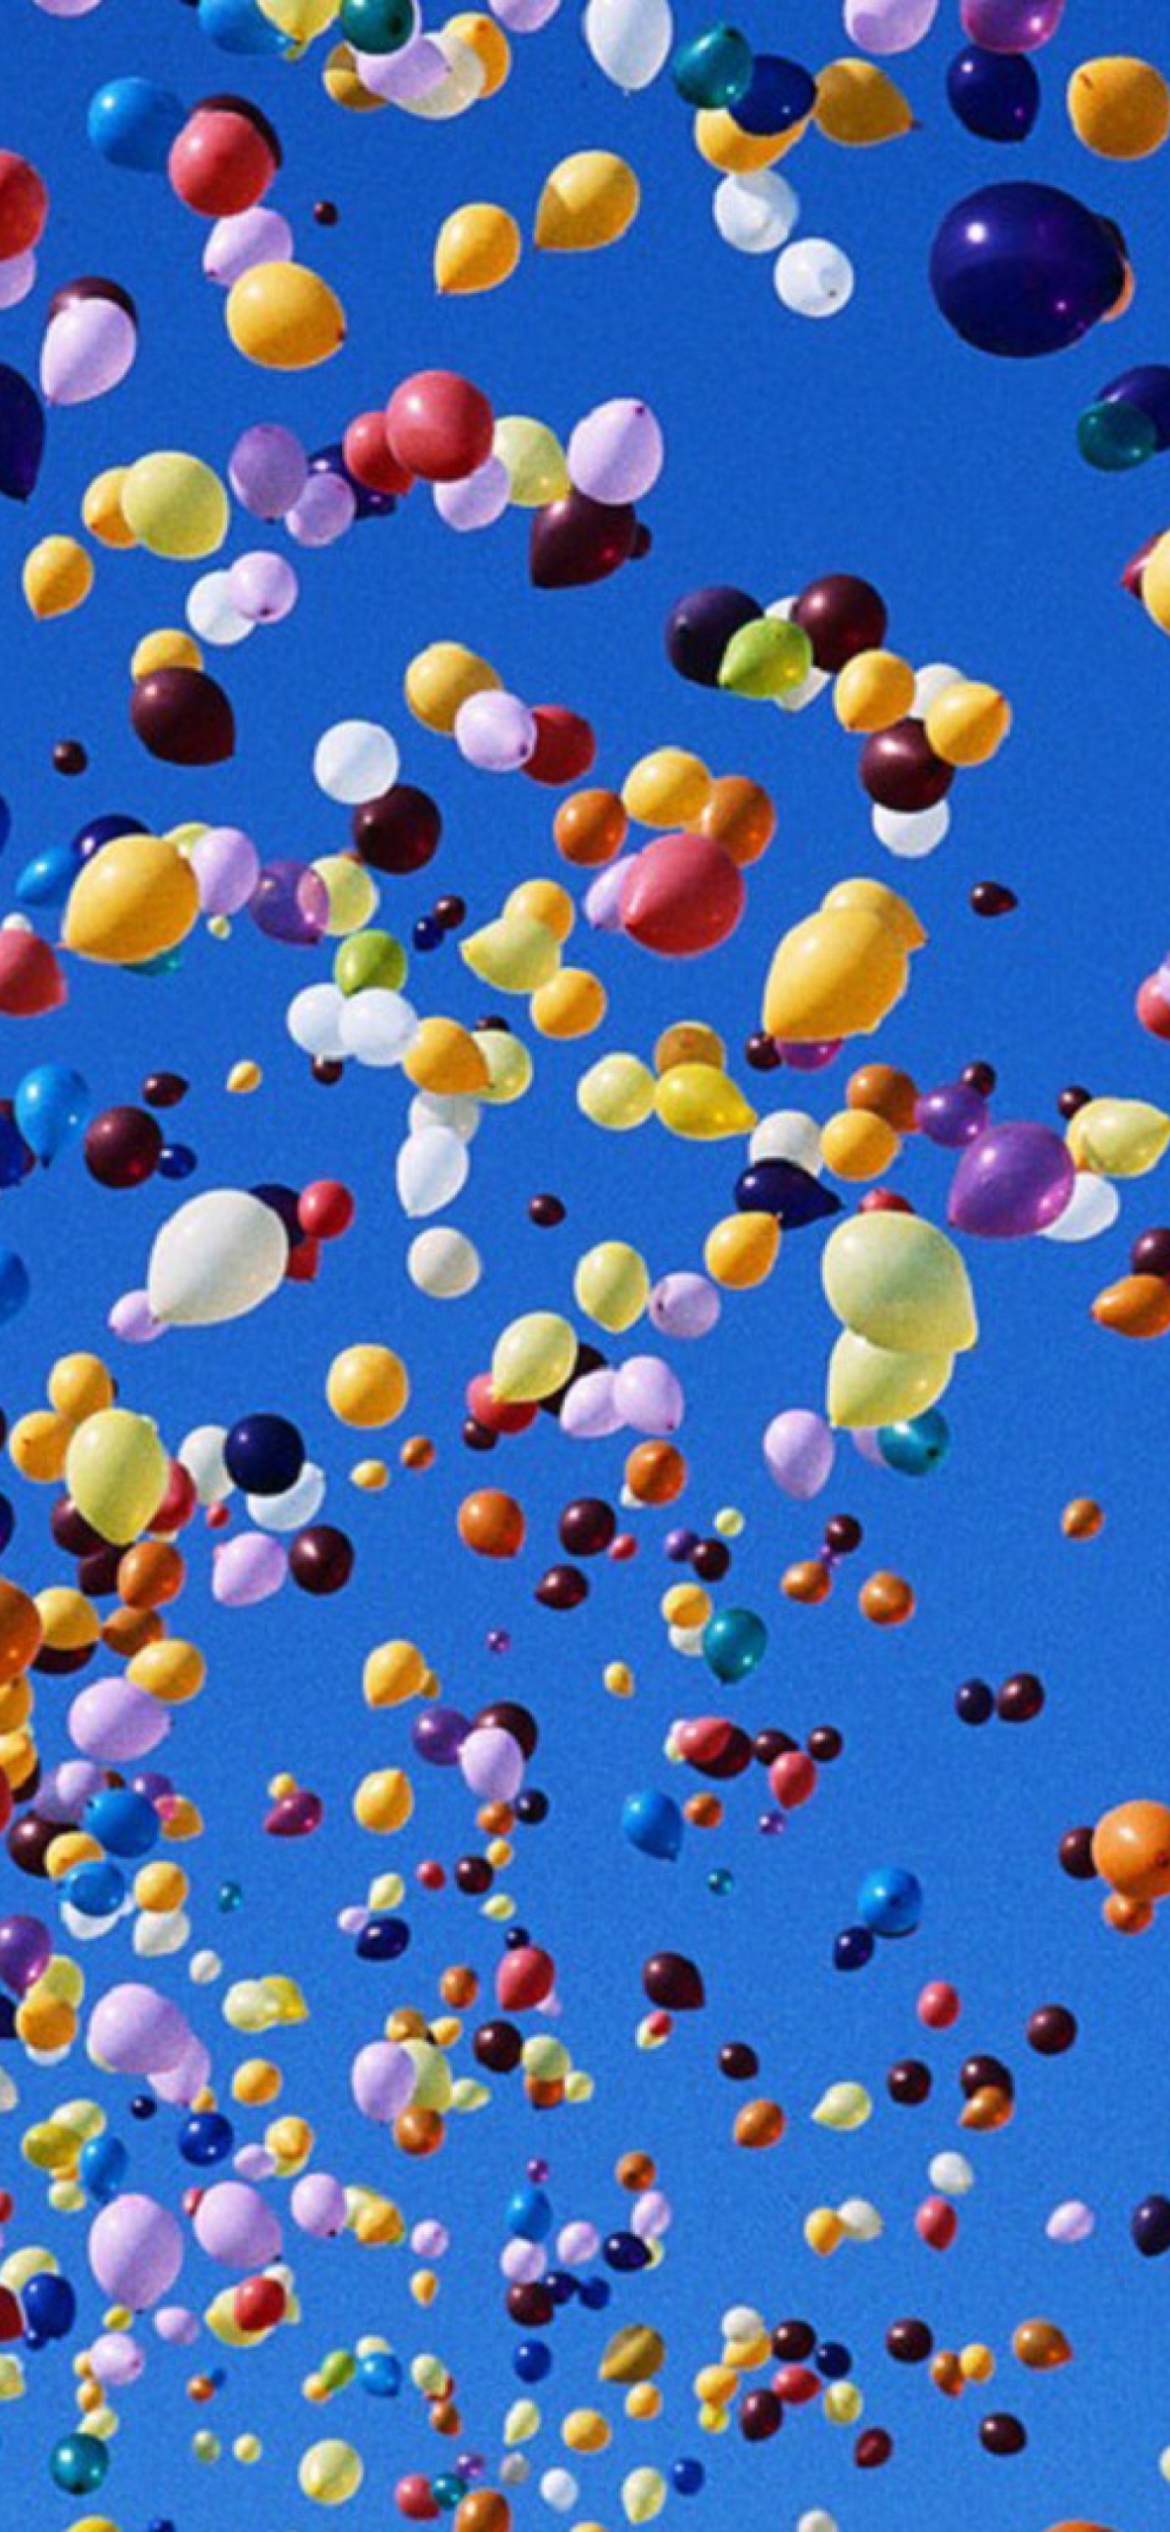 Colorful Balloons In Blue Sky wallpaper 1170x2532